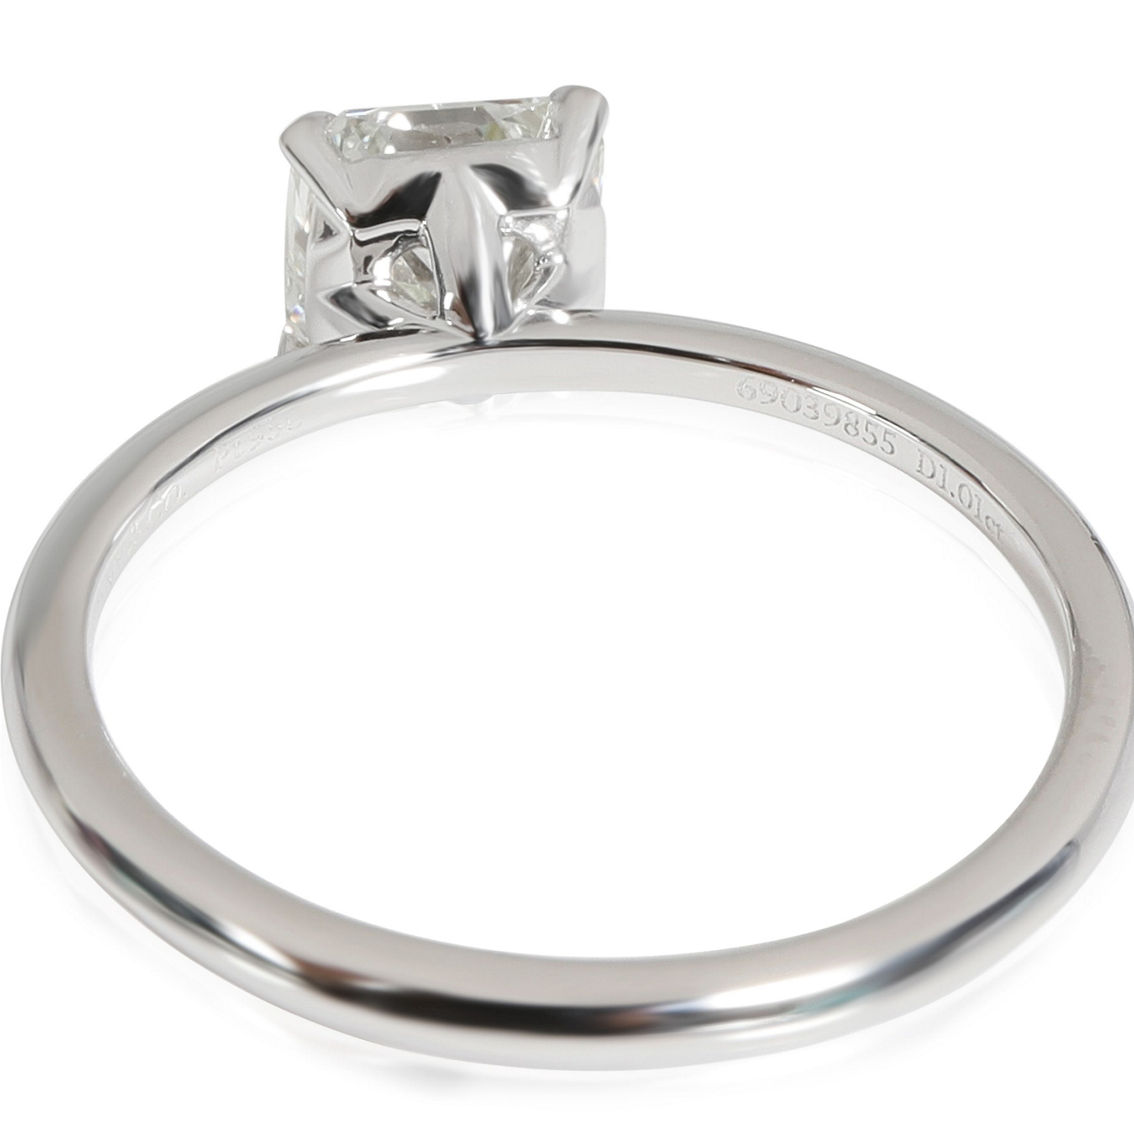 Tiffany & Co. True Solitaire Ring Pre-Owned - Image 3 of 3